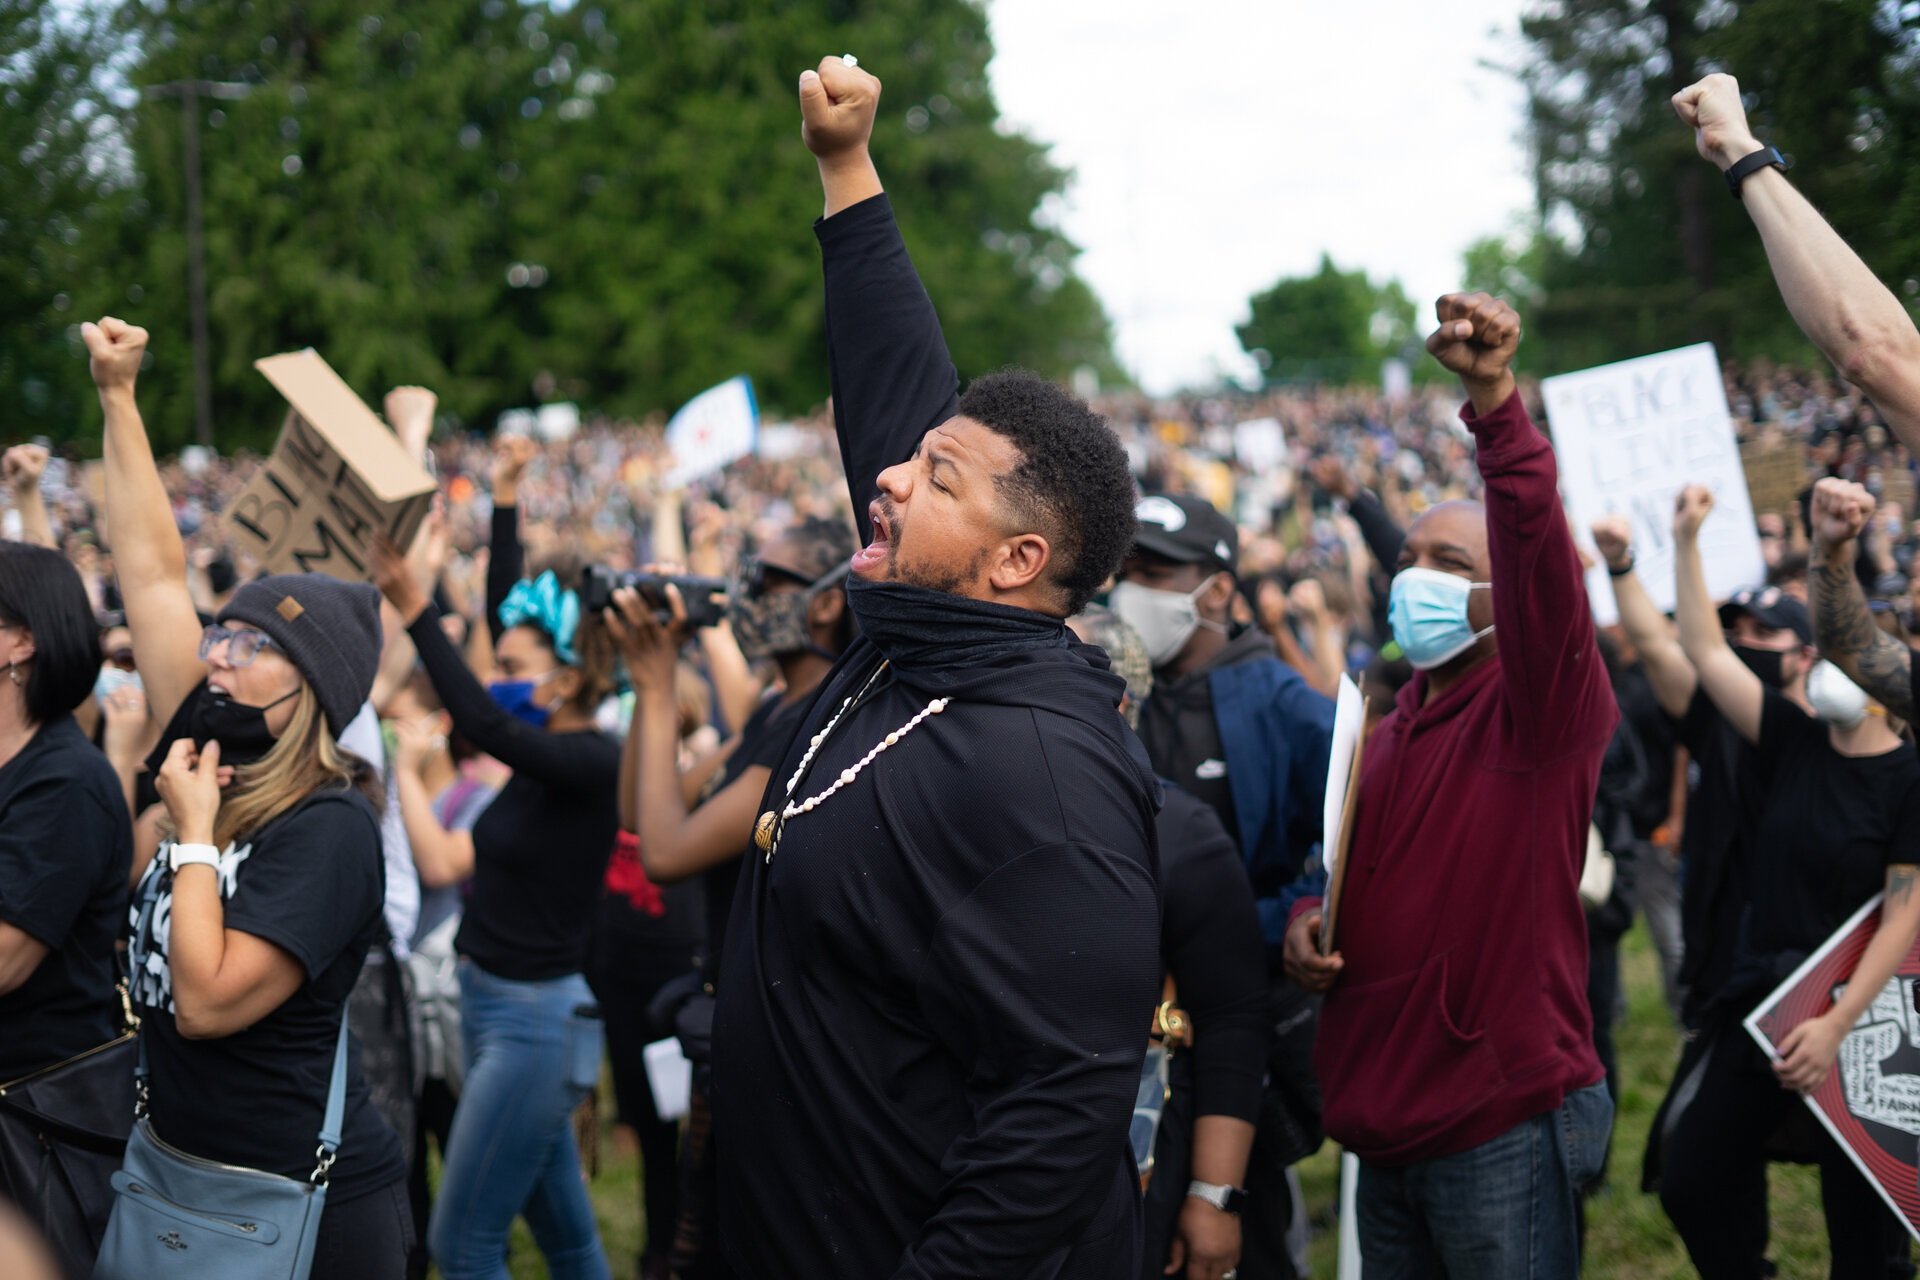  Jordan Chaney raises his fist during a moment of silence for lives lost to gun and police violence. Thousands gather to march from Othello Park in Seattle’s South end.  